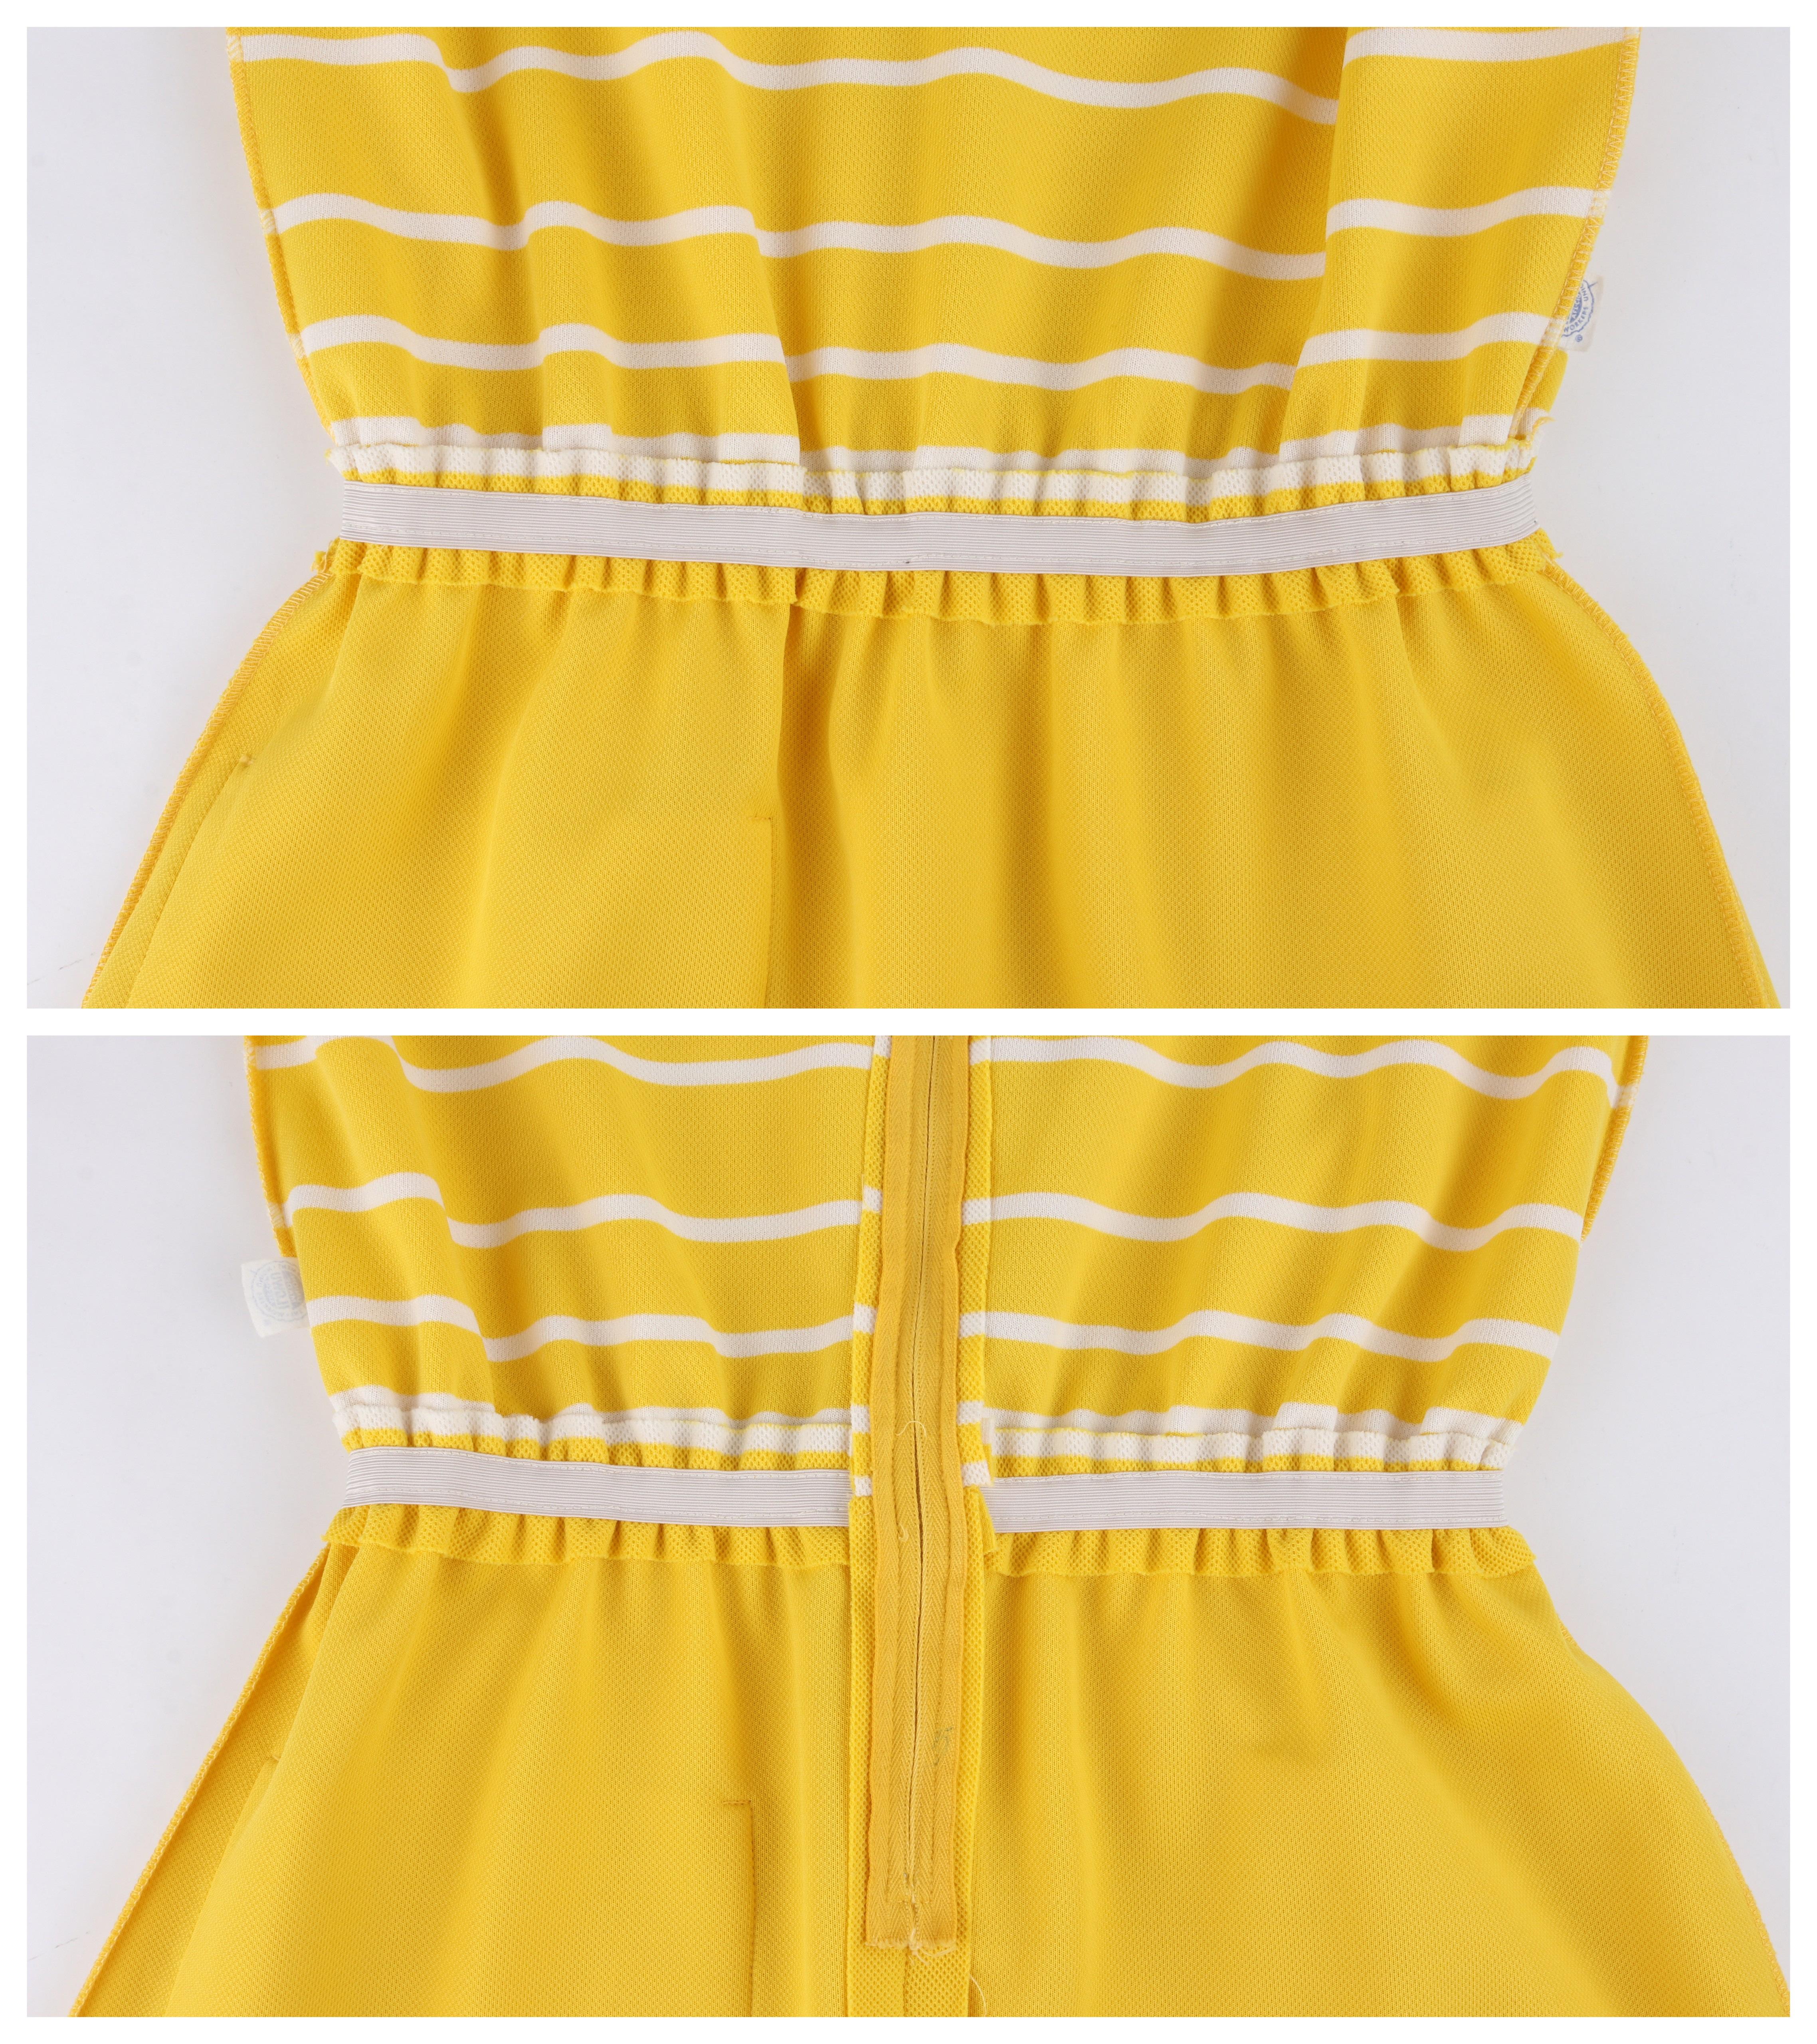 DAVID CRYSTAL LACOSTE c.1960's Yellow White Striped Knee Length Polo Sport Dress For Sale 1